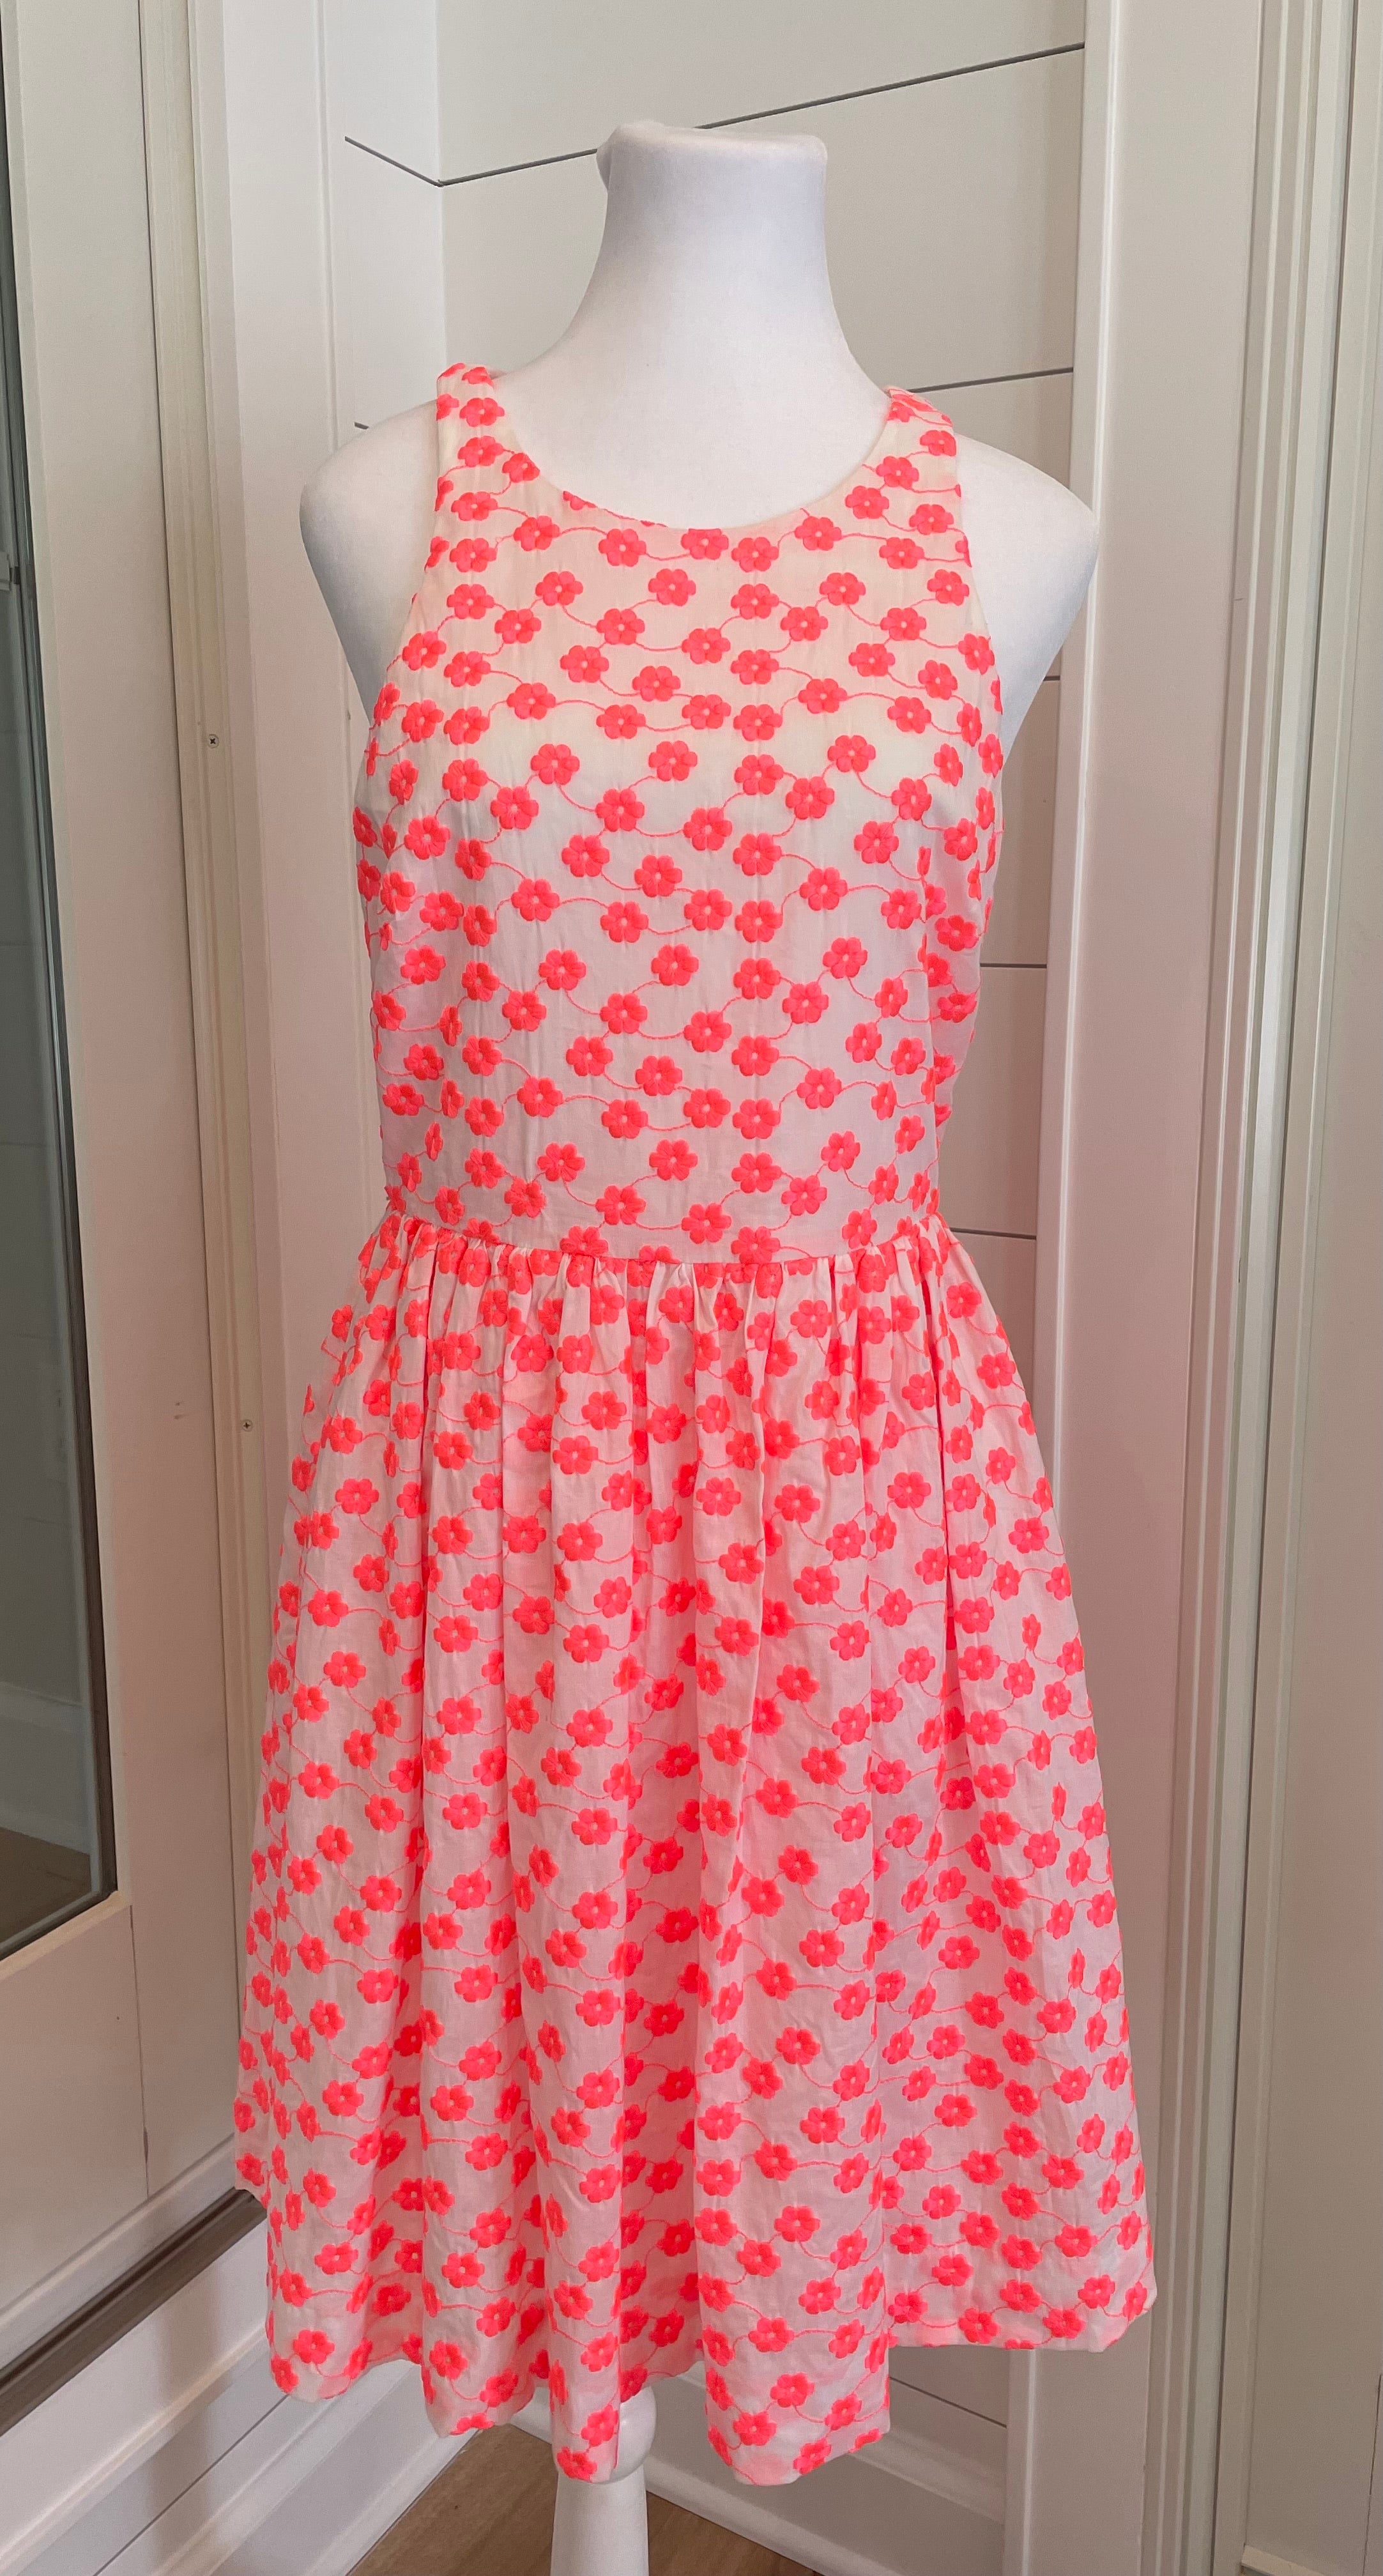 J.Crew Embroidered Floral Dress, Coral/White Womens Size 4